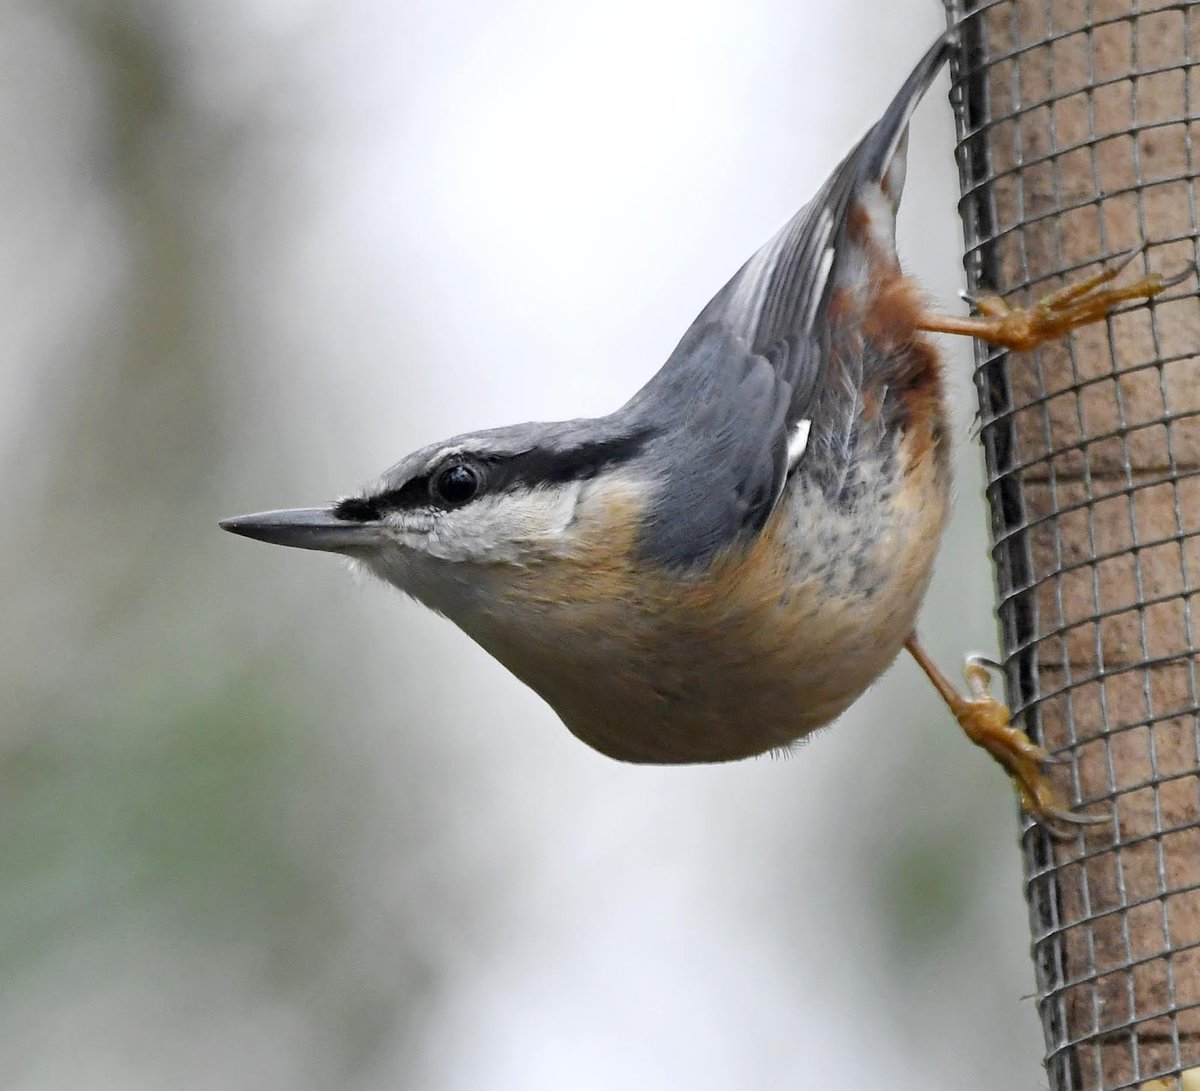 Nuthatch Gardens close to woodland may get visits from Nuthatches. They often grip tree trunks, branches and bird feeders upside down, as in this photo. They have bluey grey backs, peach bellies & black eye stripe.  #SelfIsolationBirdWatch 